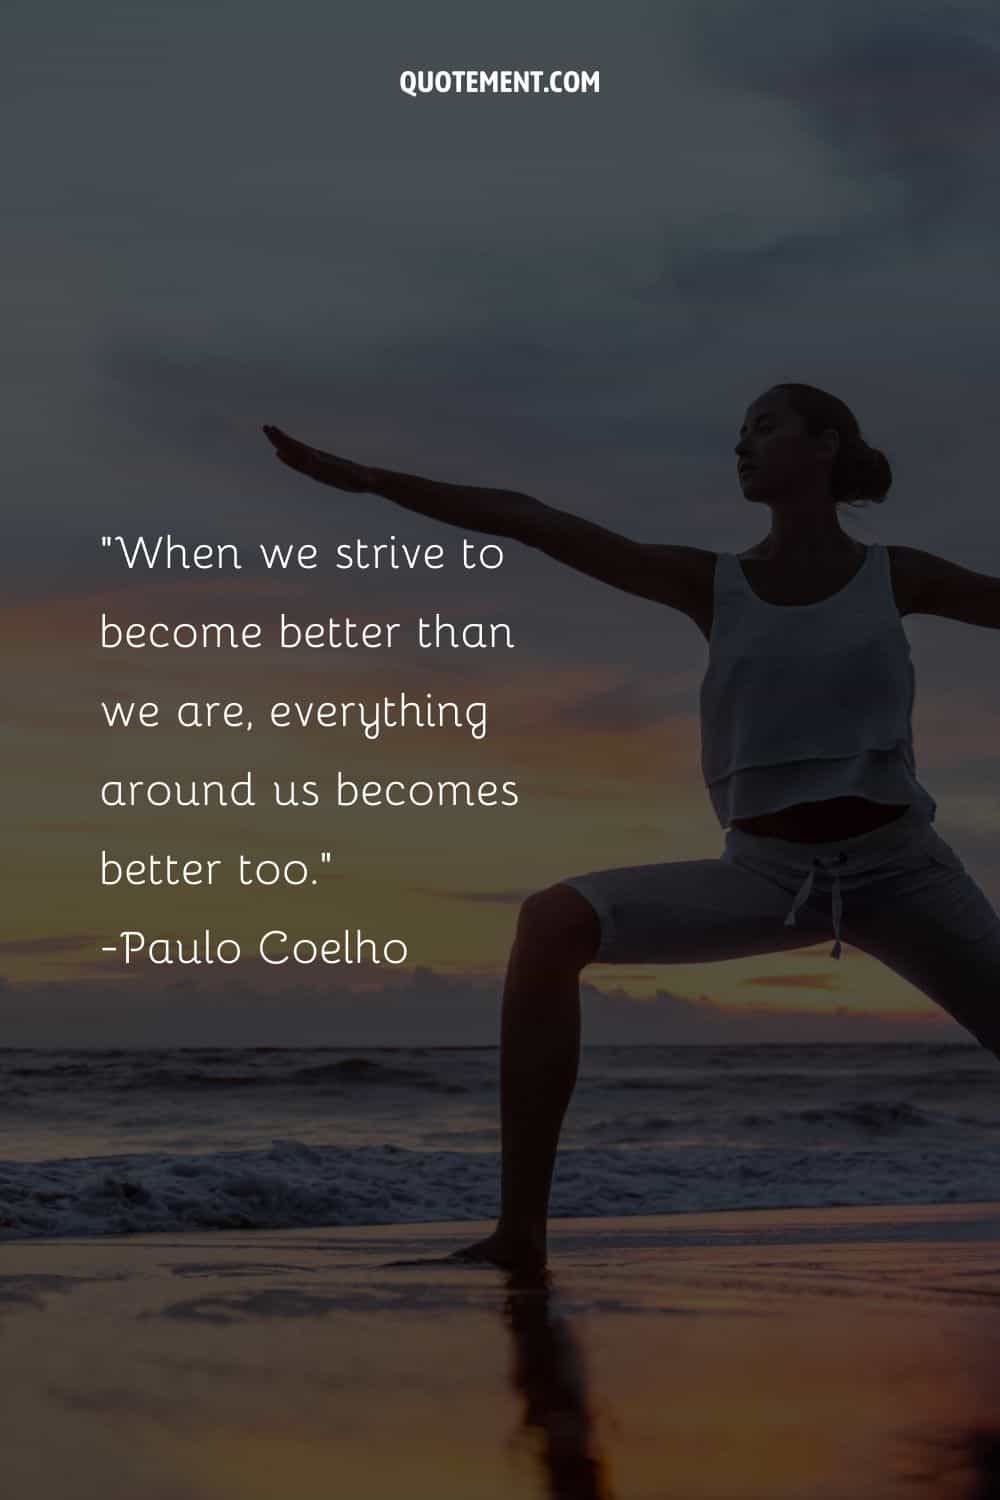 When we strive to become better than we are, everything around us becomes better too